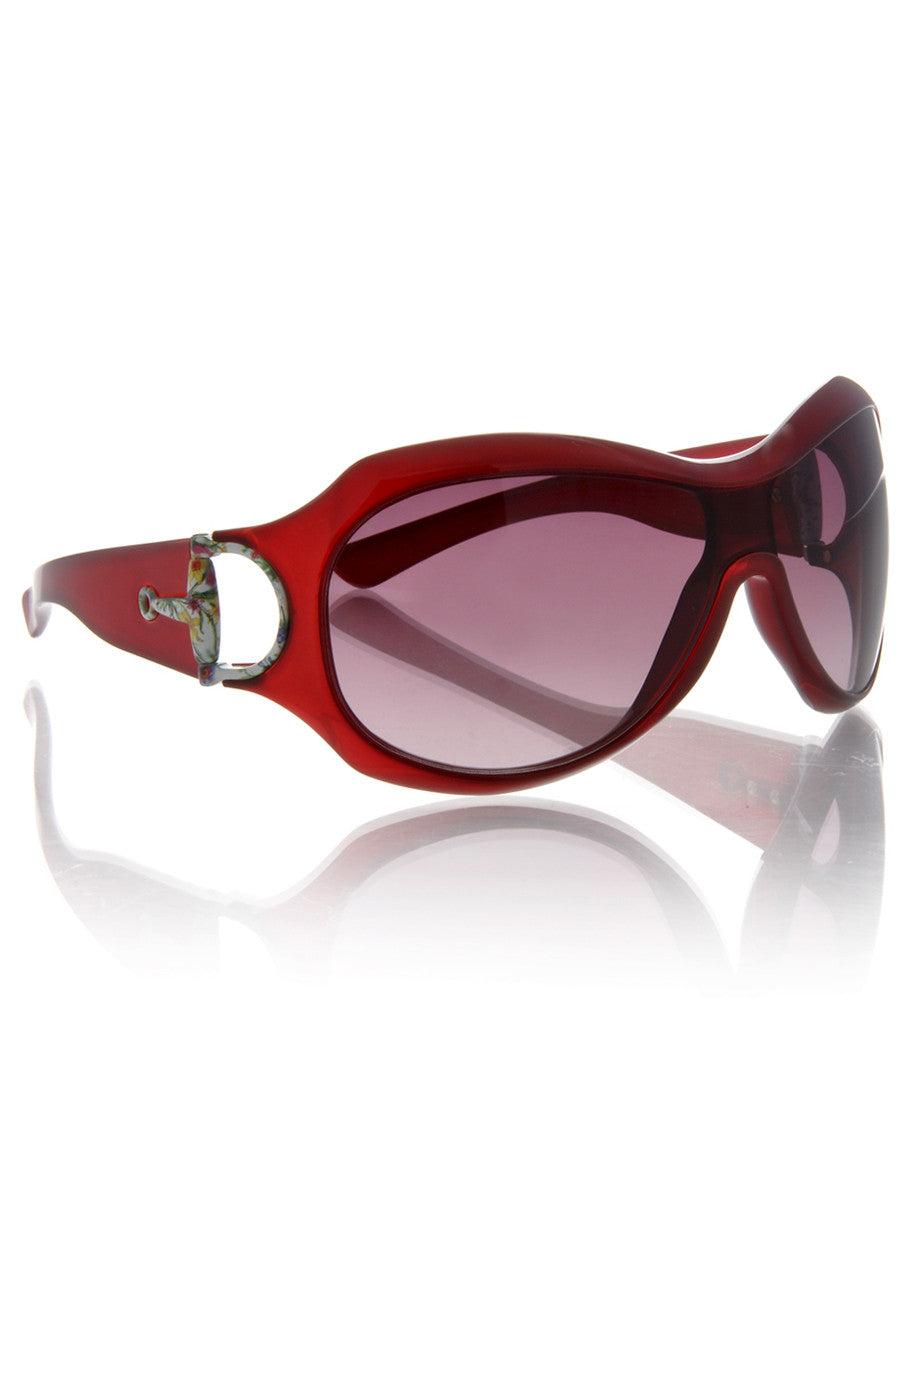 gucci sunglasses with red arms